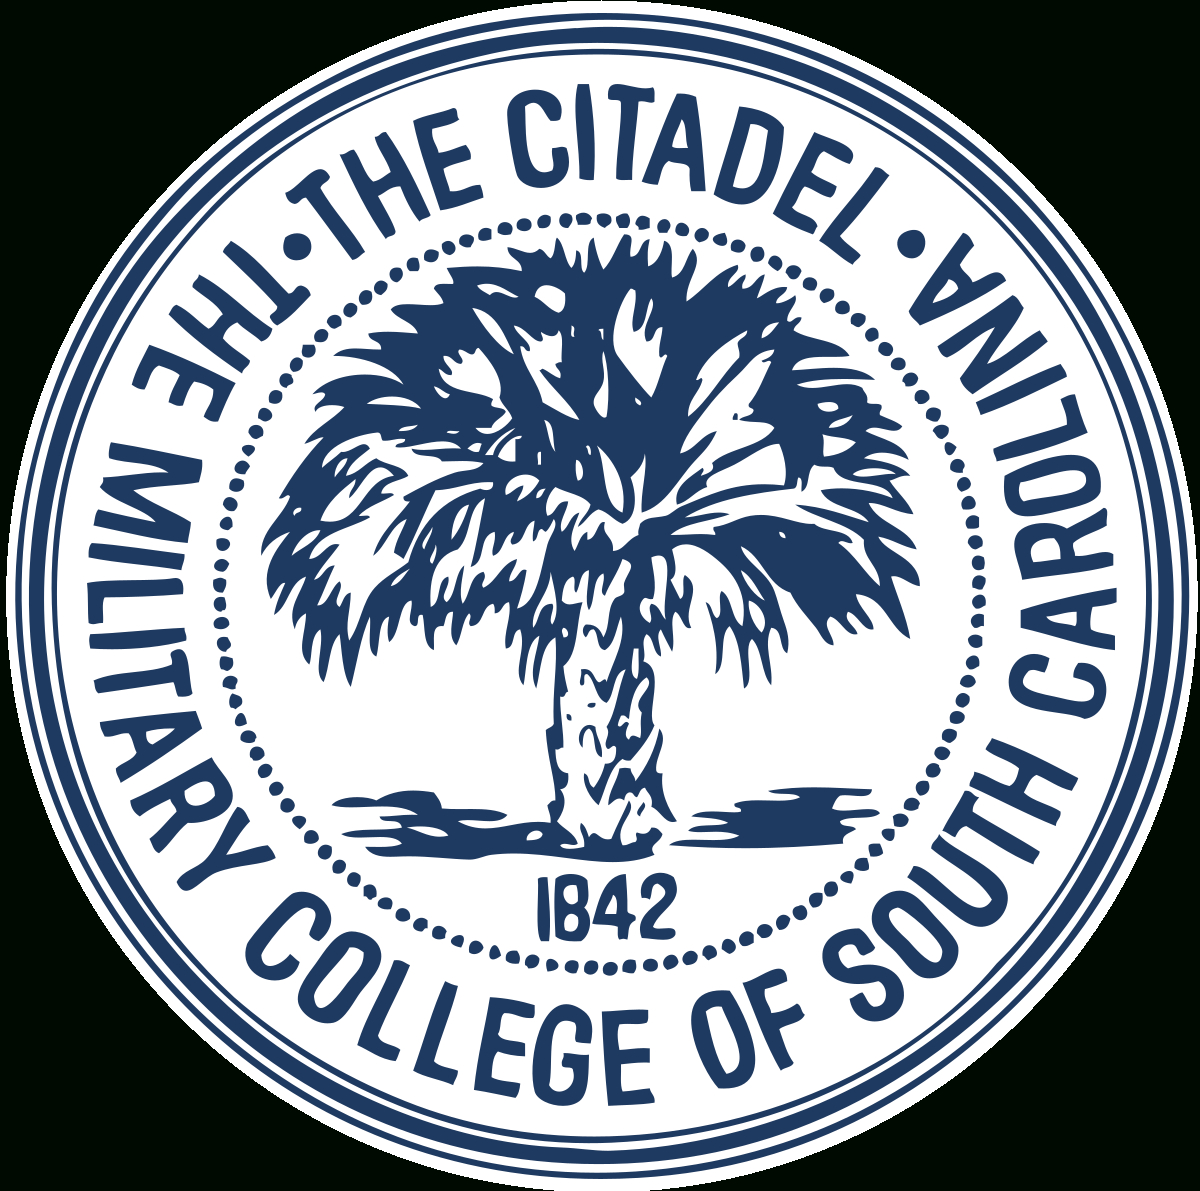 The Citadel, The Military College Of South Carolina – Wikipedia Intended For Usmc Meal Card Template